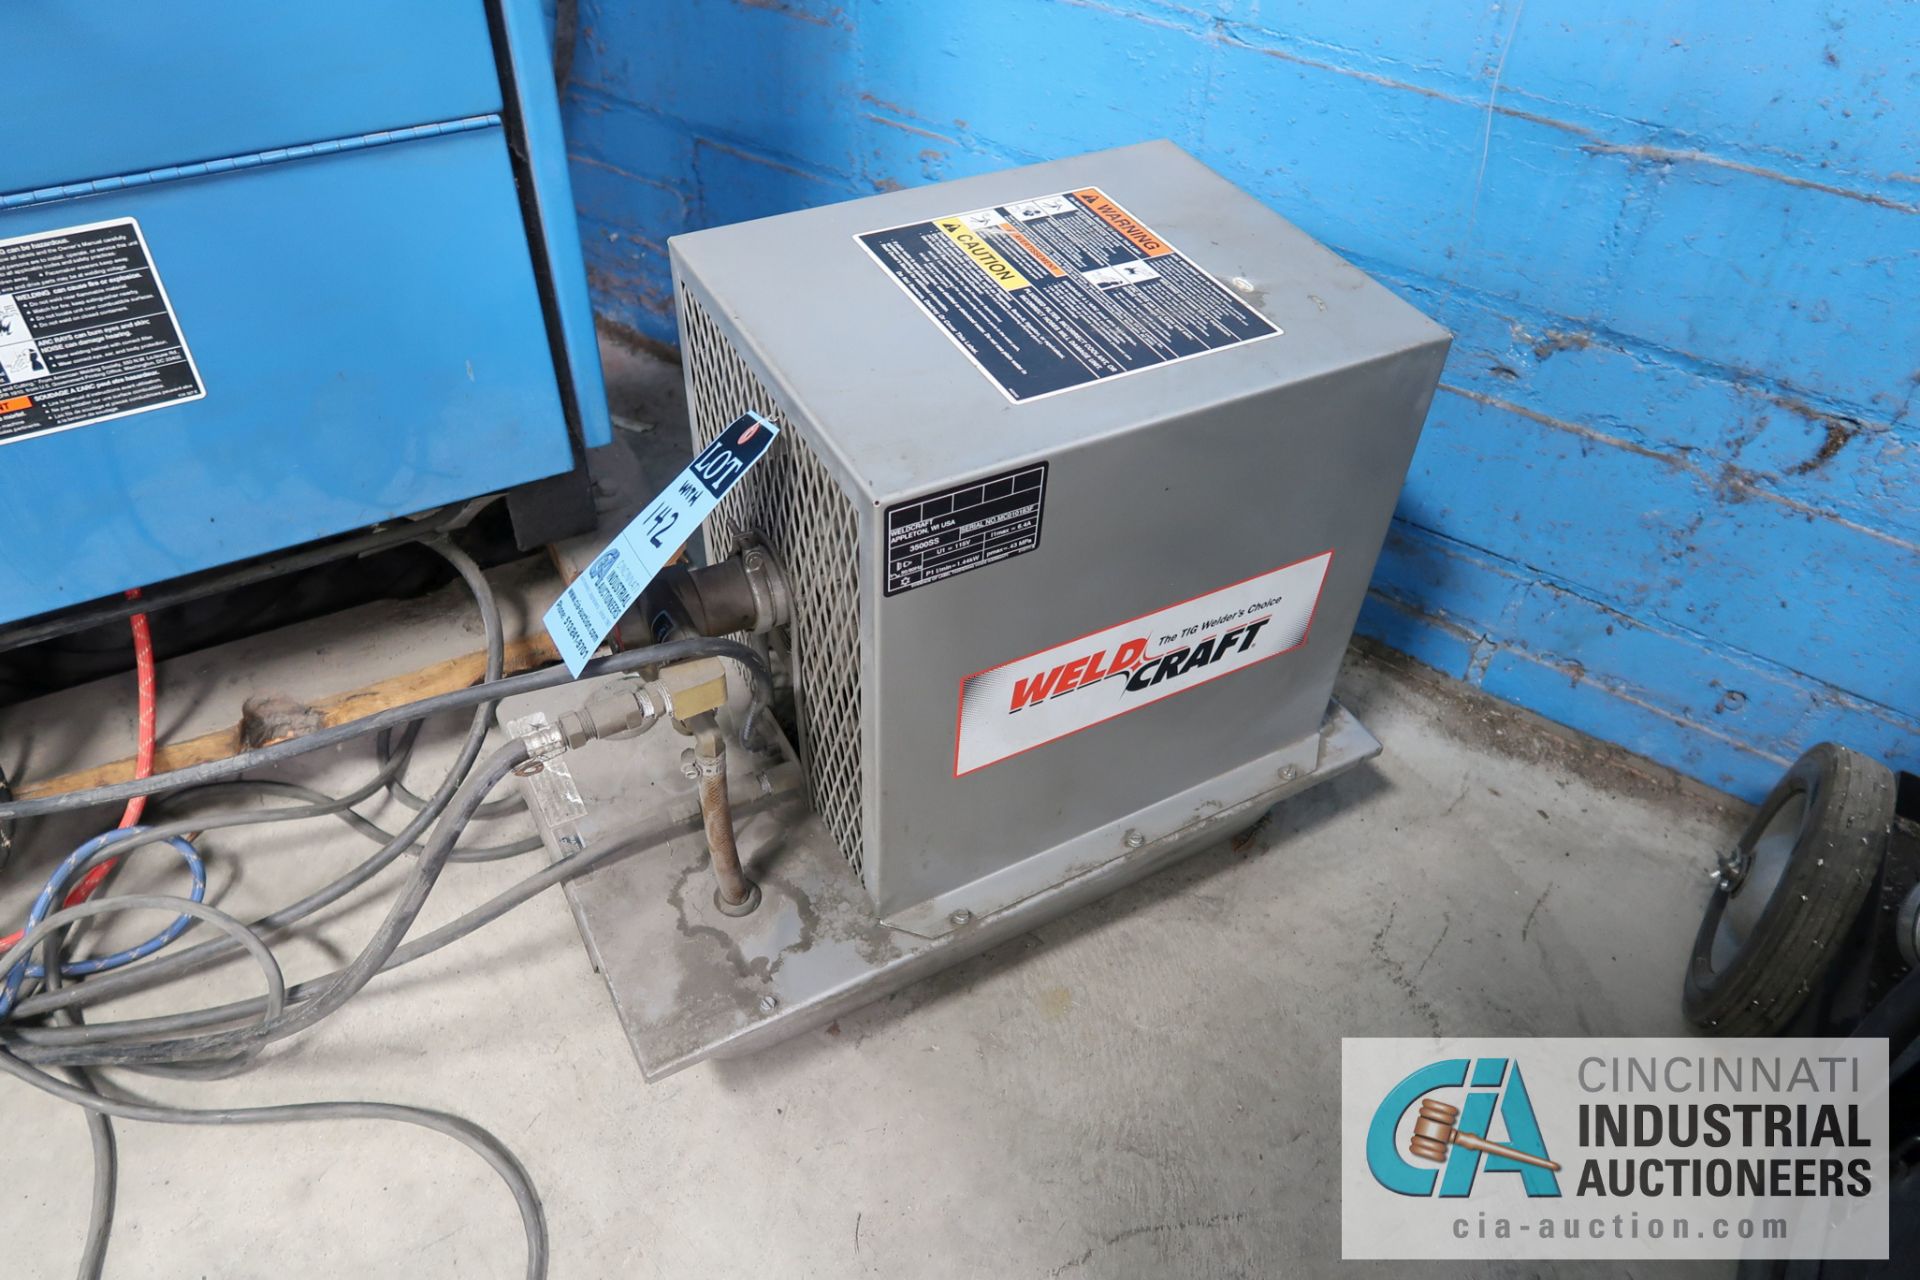 300 AMP MILLER AEROWAVE CC-AC/DC HYBRID ARC WELDING POWER SOURCE; S/N LE450886, WITH WELD CRAFT - Image 5 of 6